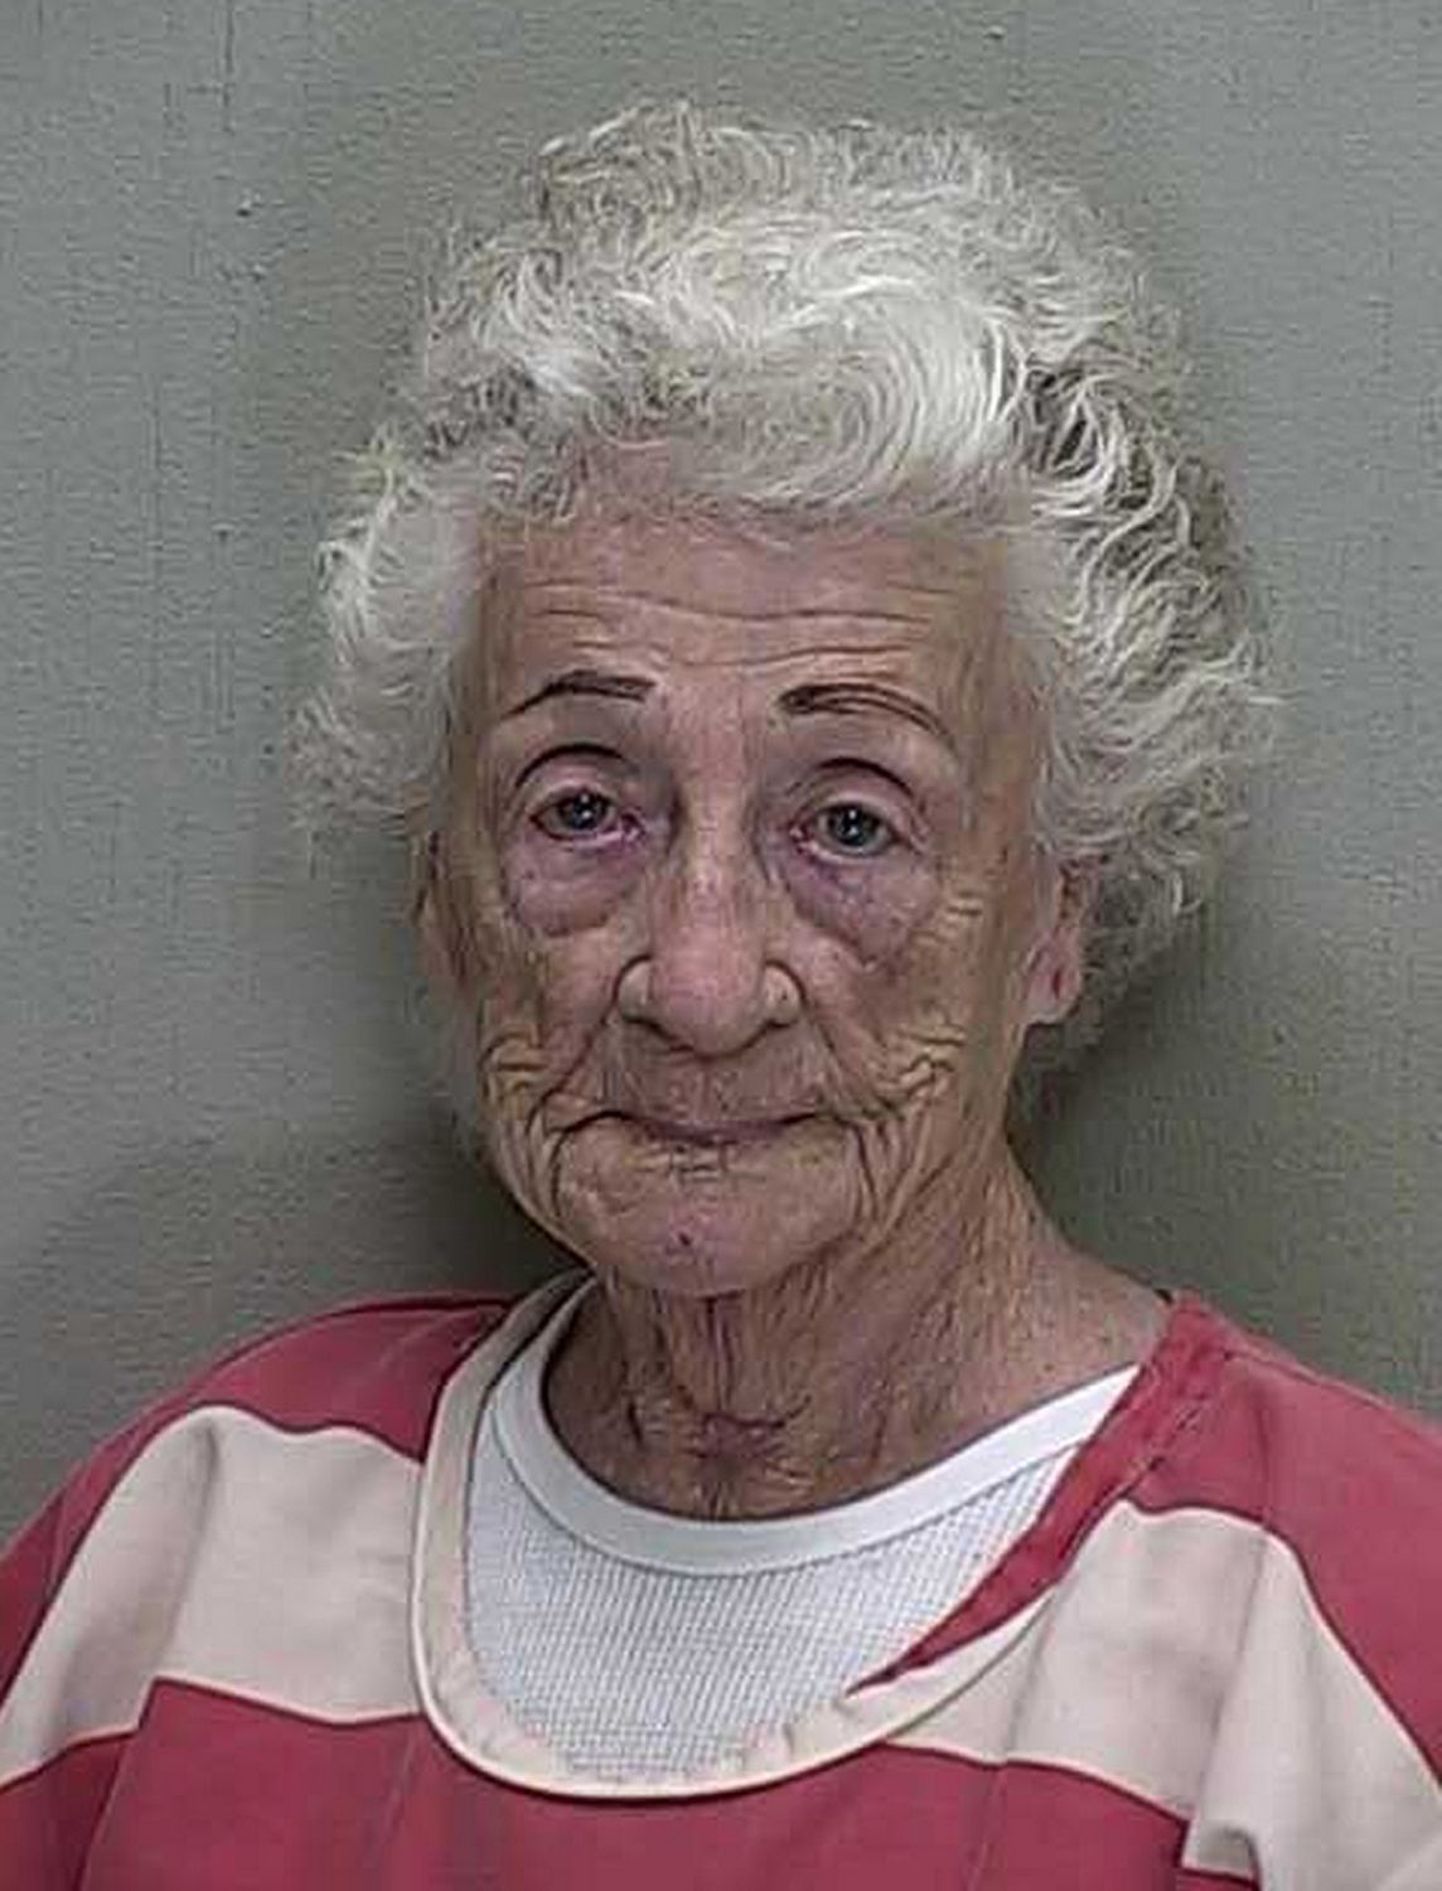 The booking mugshot of 92-year-old Helen Staudinger is seen in this handout released March 23, 2011. The central Florida woman fired a semi-automatic pistol four times at her 53-year-old neighbor's house after he refused to kiss her, police said on Tuesday.     REUTERS/Courtesy of Marion County Sheriffs Office/Handout  (UNITED STATES - Tags: CRIME LAW SOCIETY IMAGES OF THE DAY) FOR EDITORIAL USE ONLY. NOT FOR SALE FOR MARKETING OR ADVERTISING CAMPAIGNS. THIS IMAGE HAS BEEN SUPPLIED BY A THIRD PARTY. IT IS DISTRIBUTED, EXACTLY AS RECEIVED BY REUTERS, AS A SERVICE TO CLIENTS